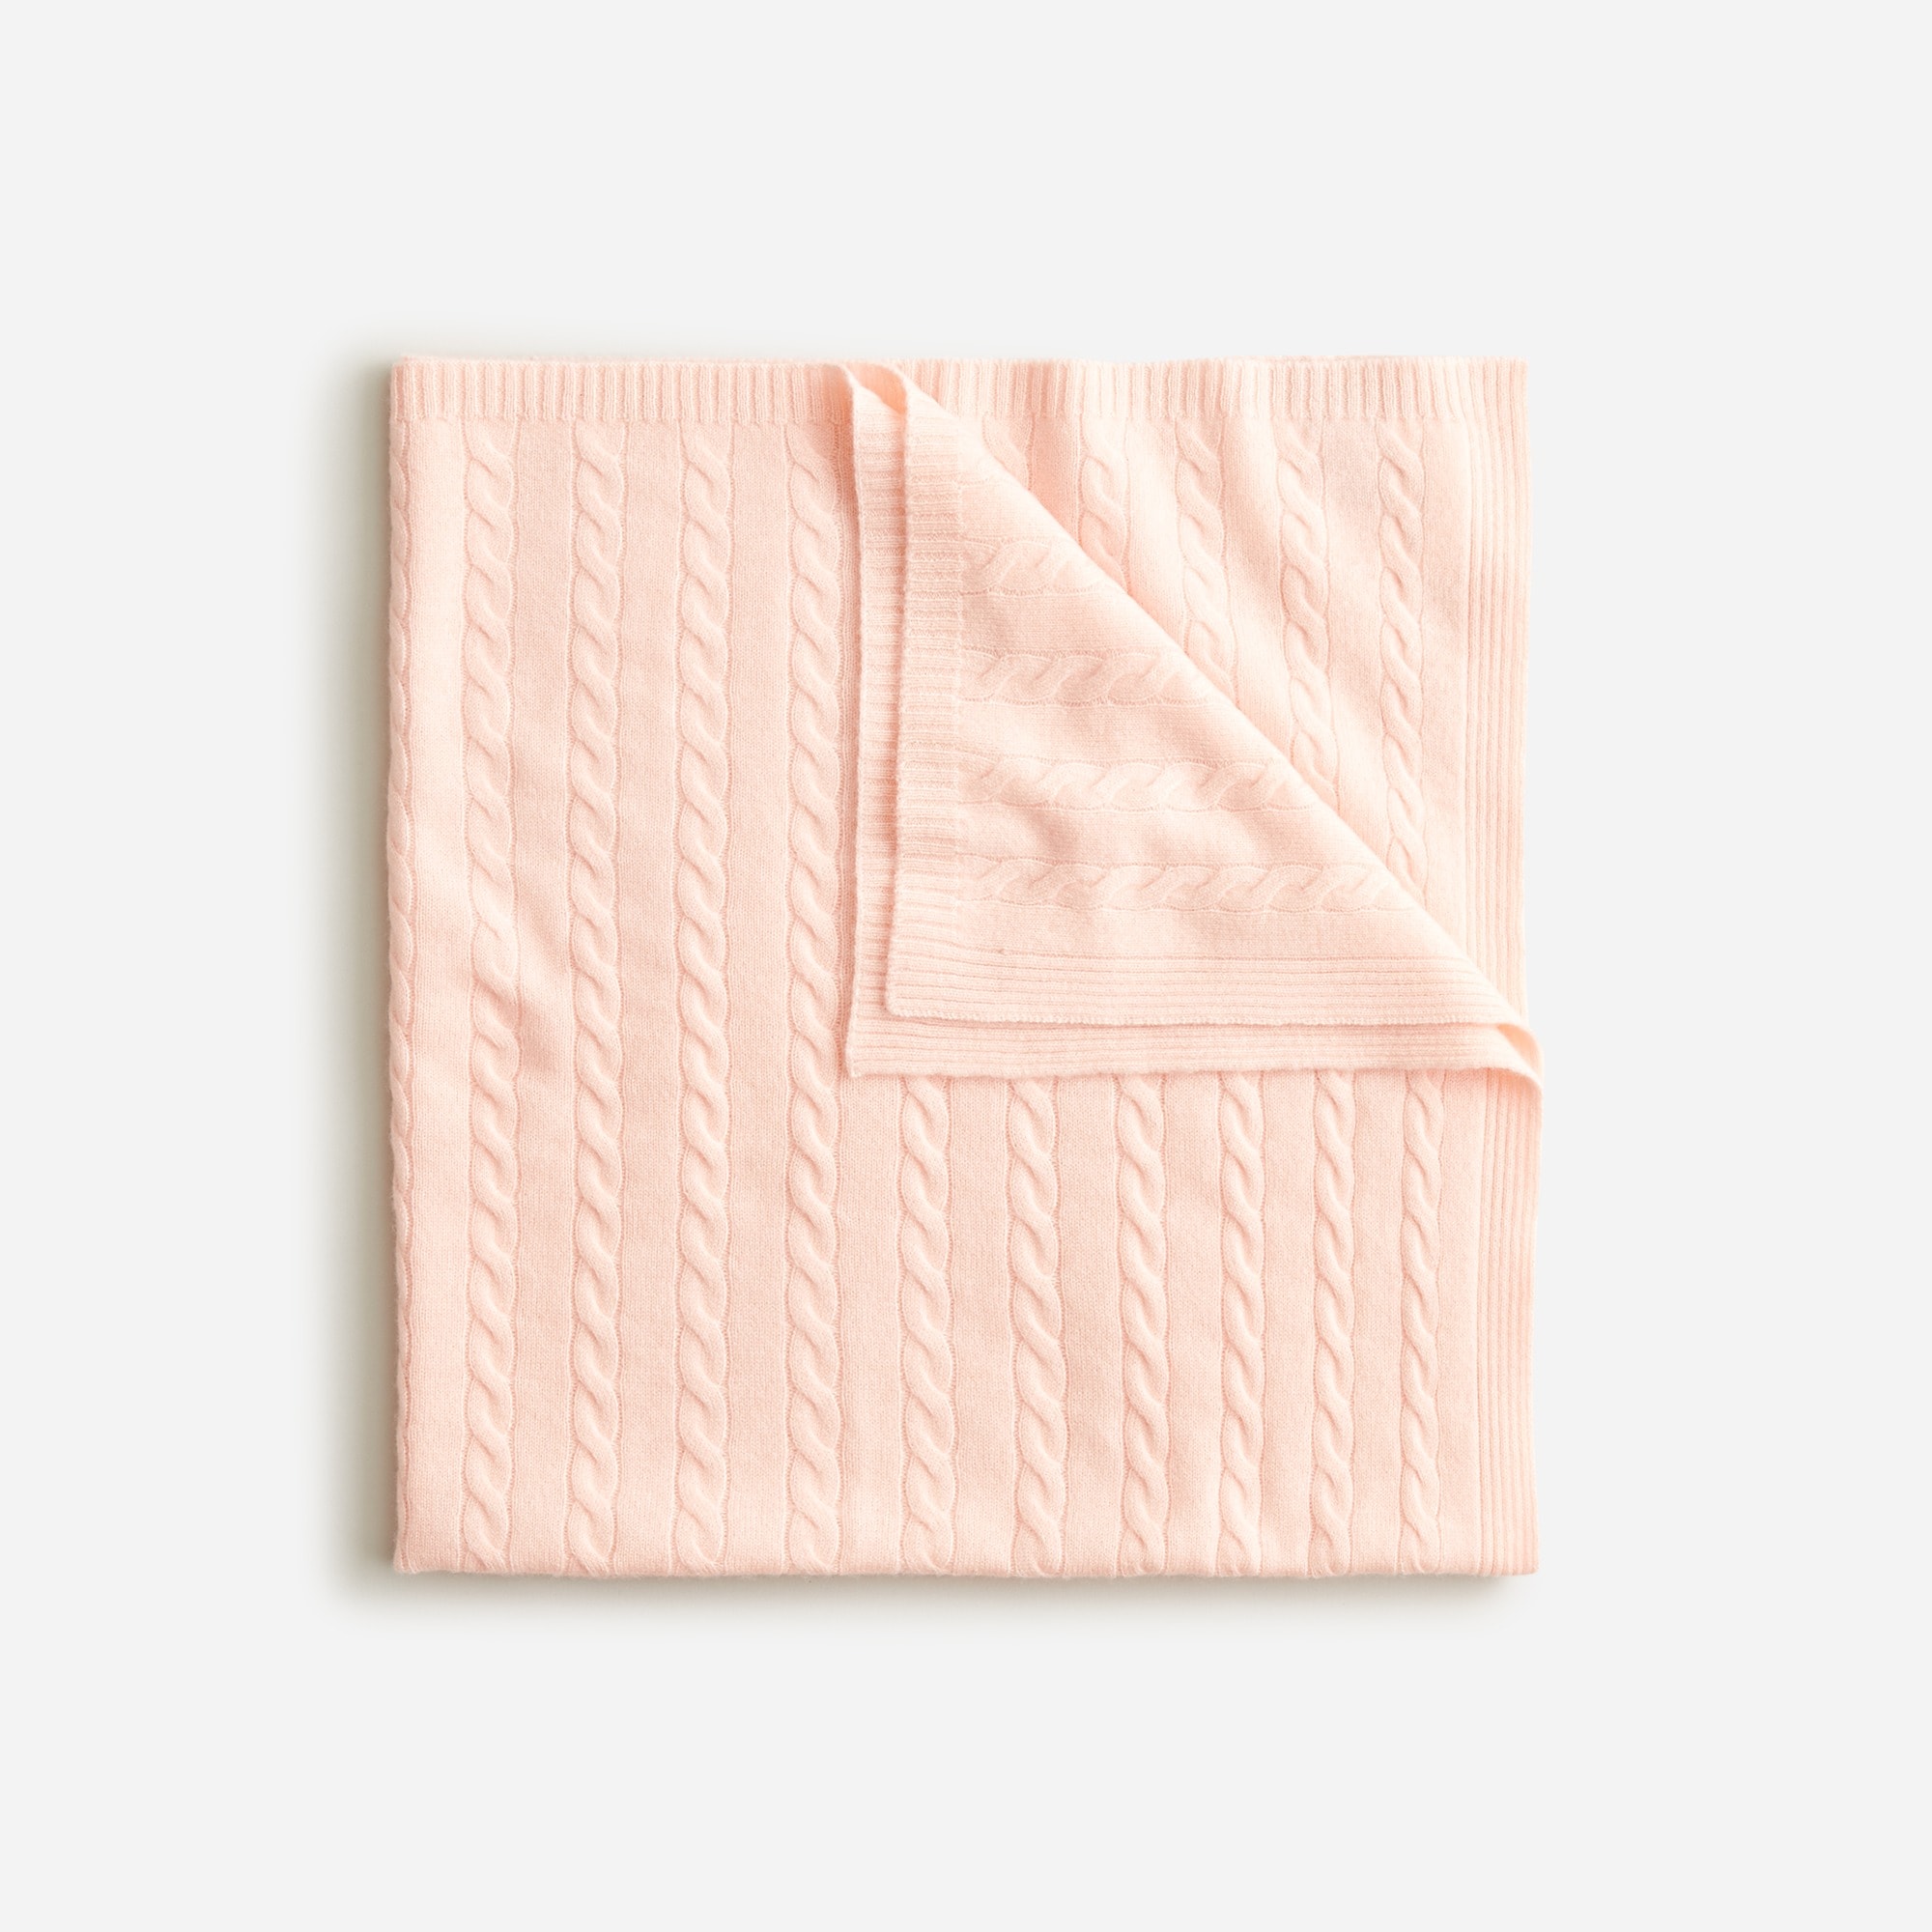 girls Limited-edition baby cashmere blanket